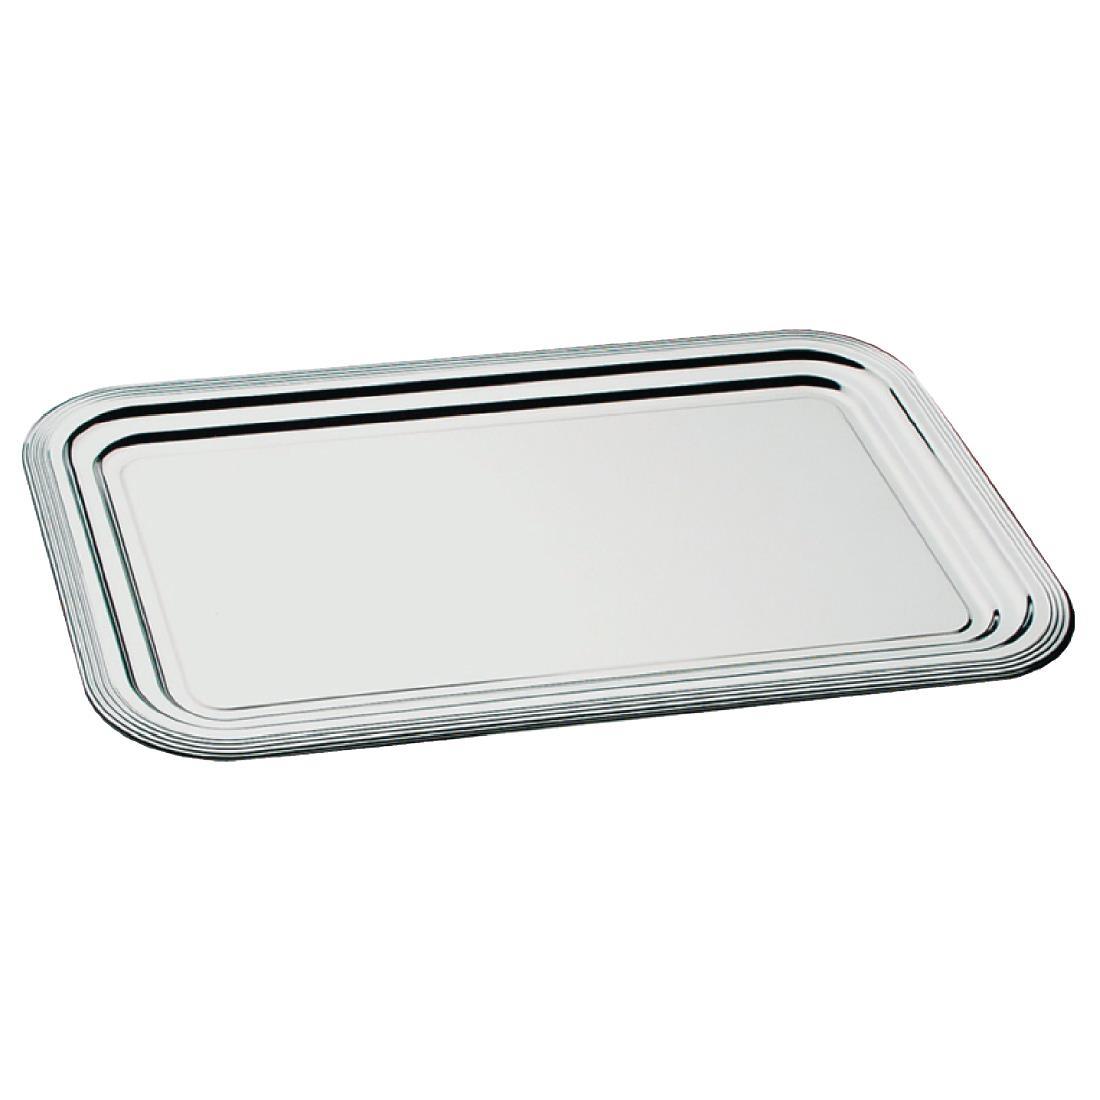 APS Semi-Disposable Party Tray GN 1/1 Chrome - F764  - 1